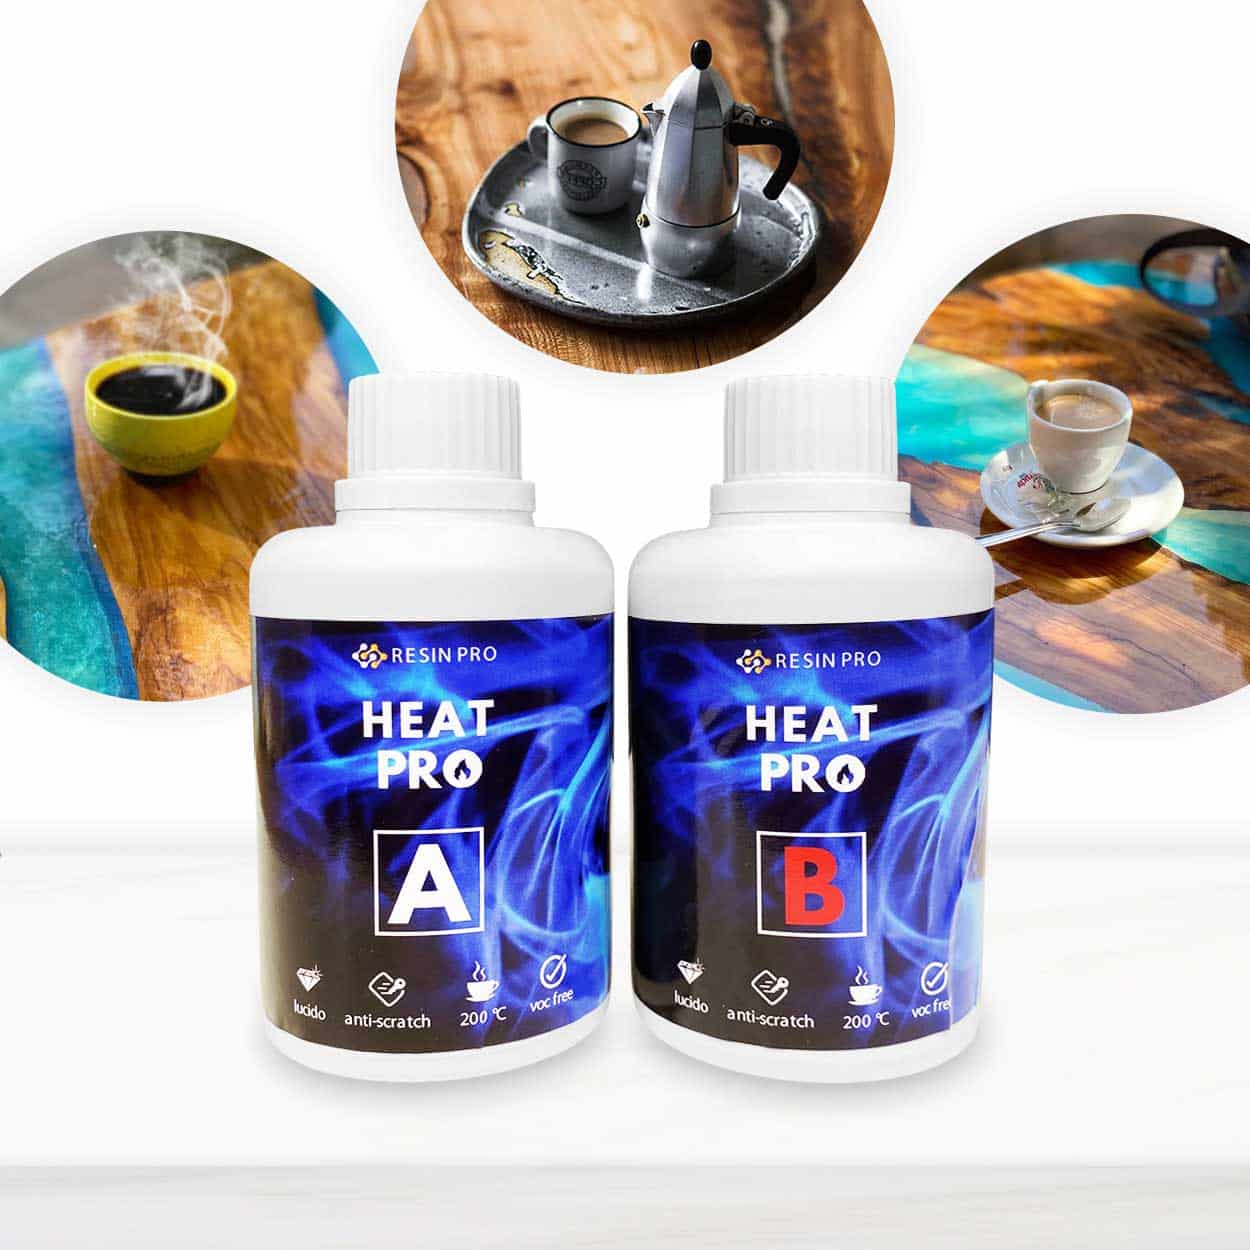 HEAT PRO - Flexible Heat-Resistant Anti-Scratch Glossy Coating - ResinPro  - Creativity at your service